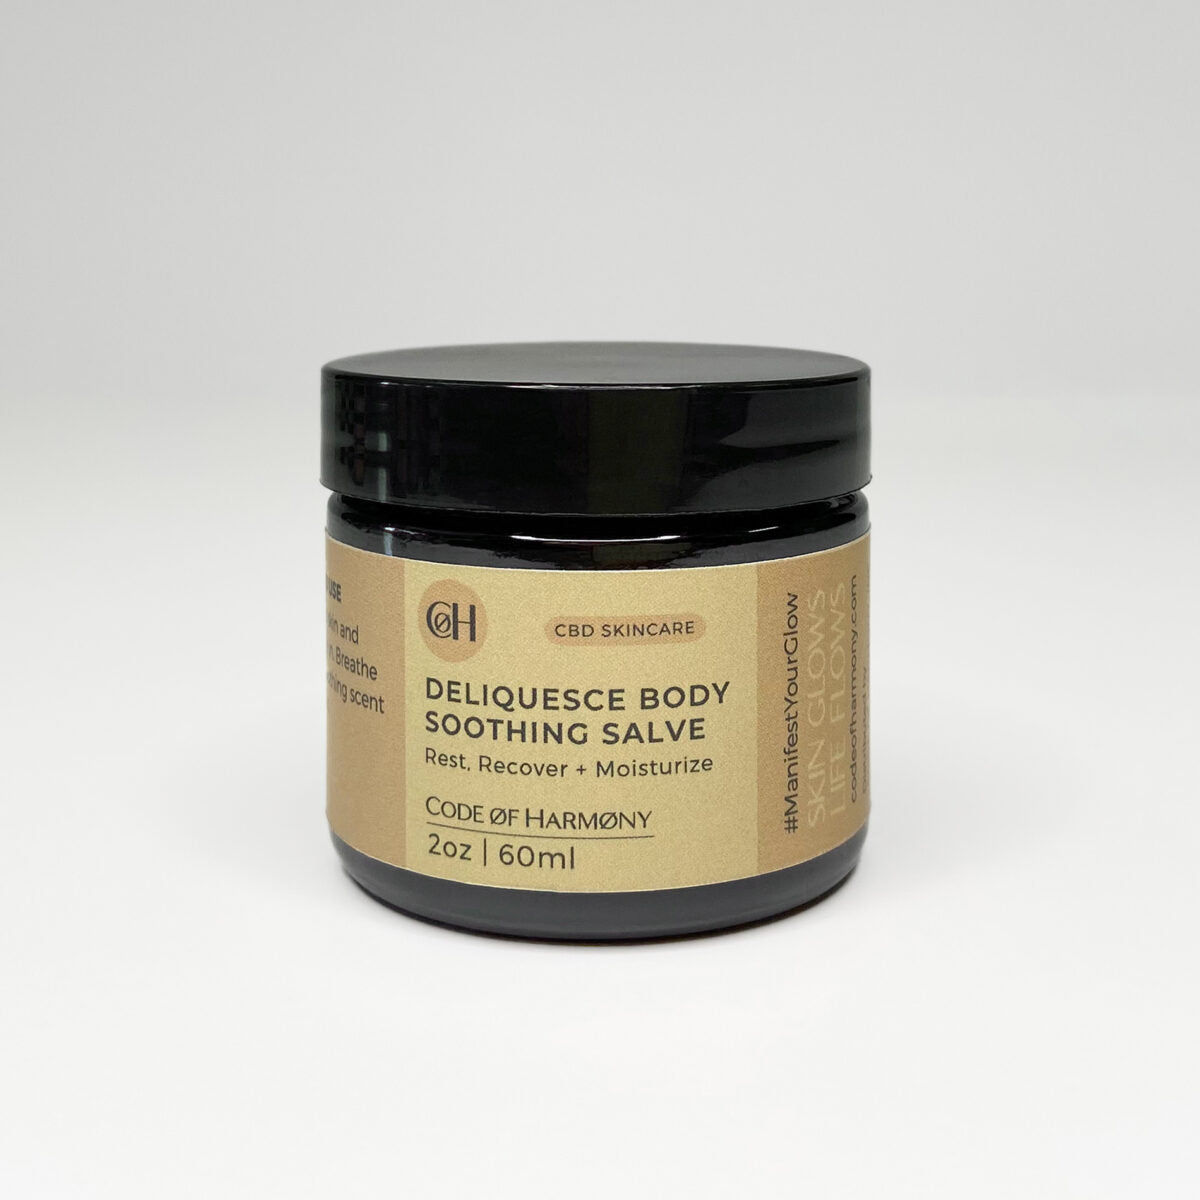 Deliquesce Body Soothing Salve